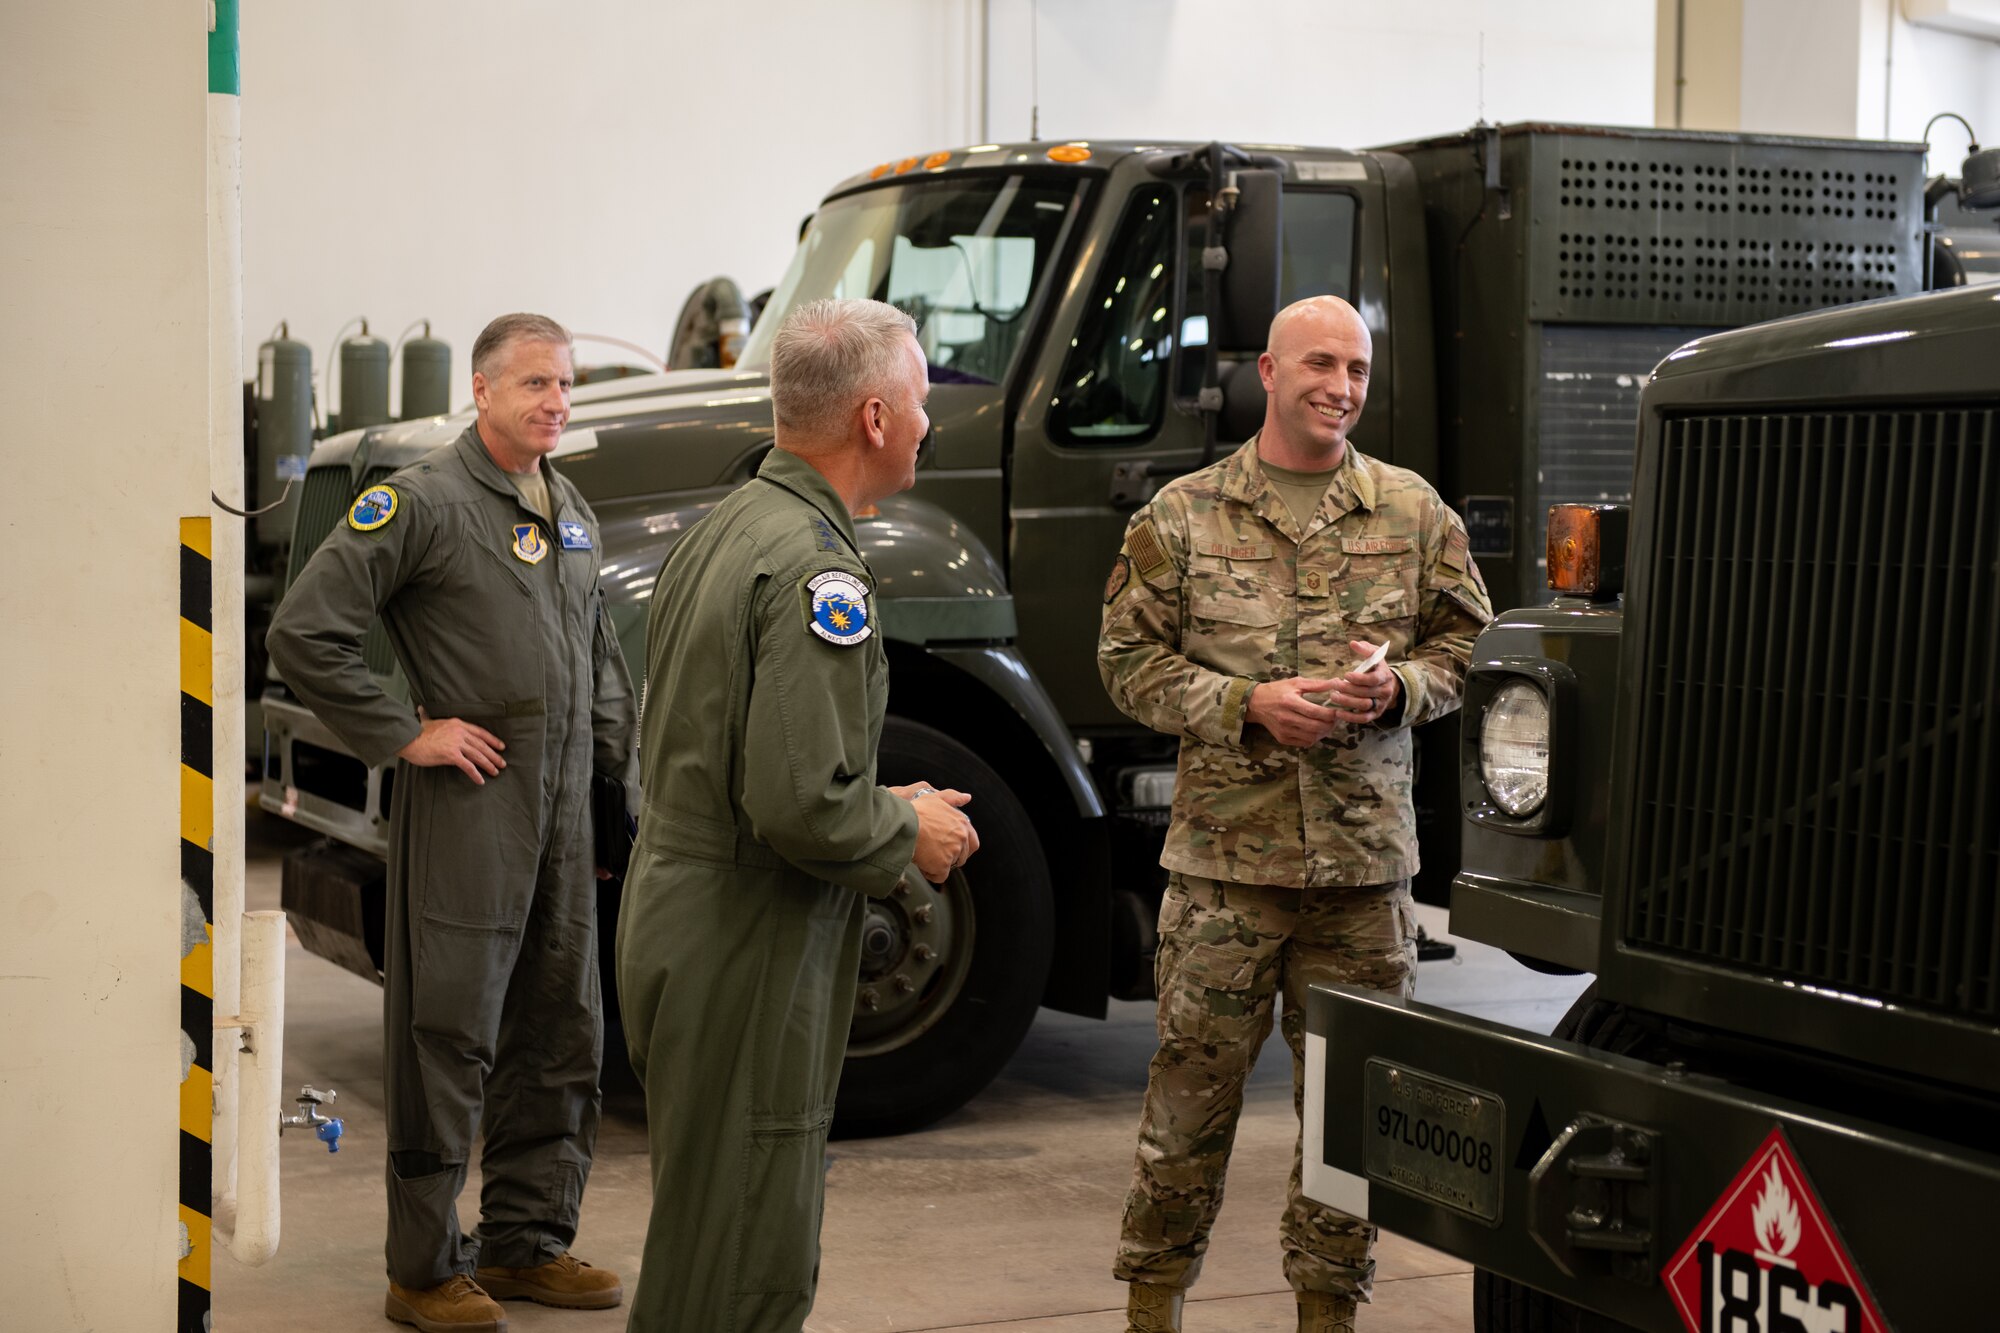 A USAF general meets with Airmen in a mechanic shop where trucks are parked